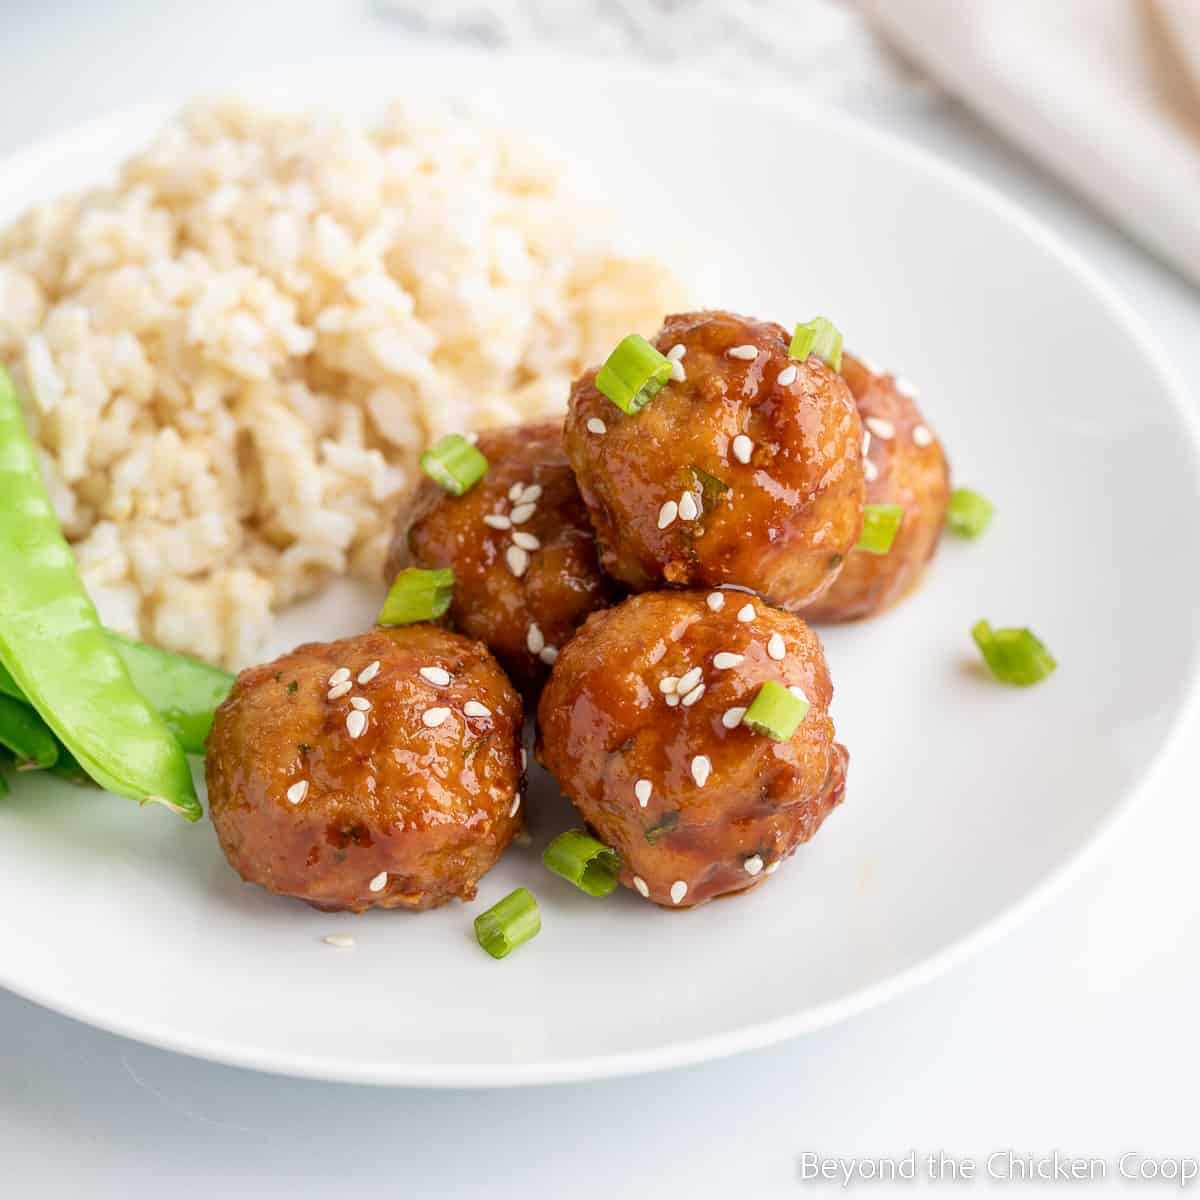 Meatballs topped with sesame seeds next to rice on a plate. 